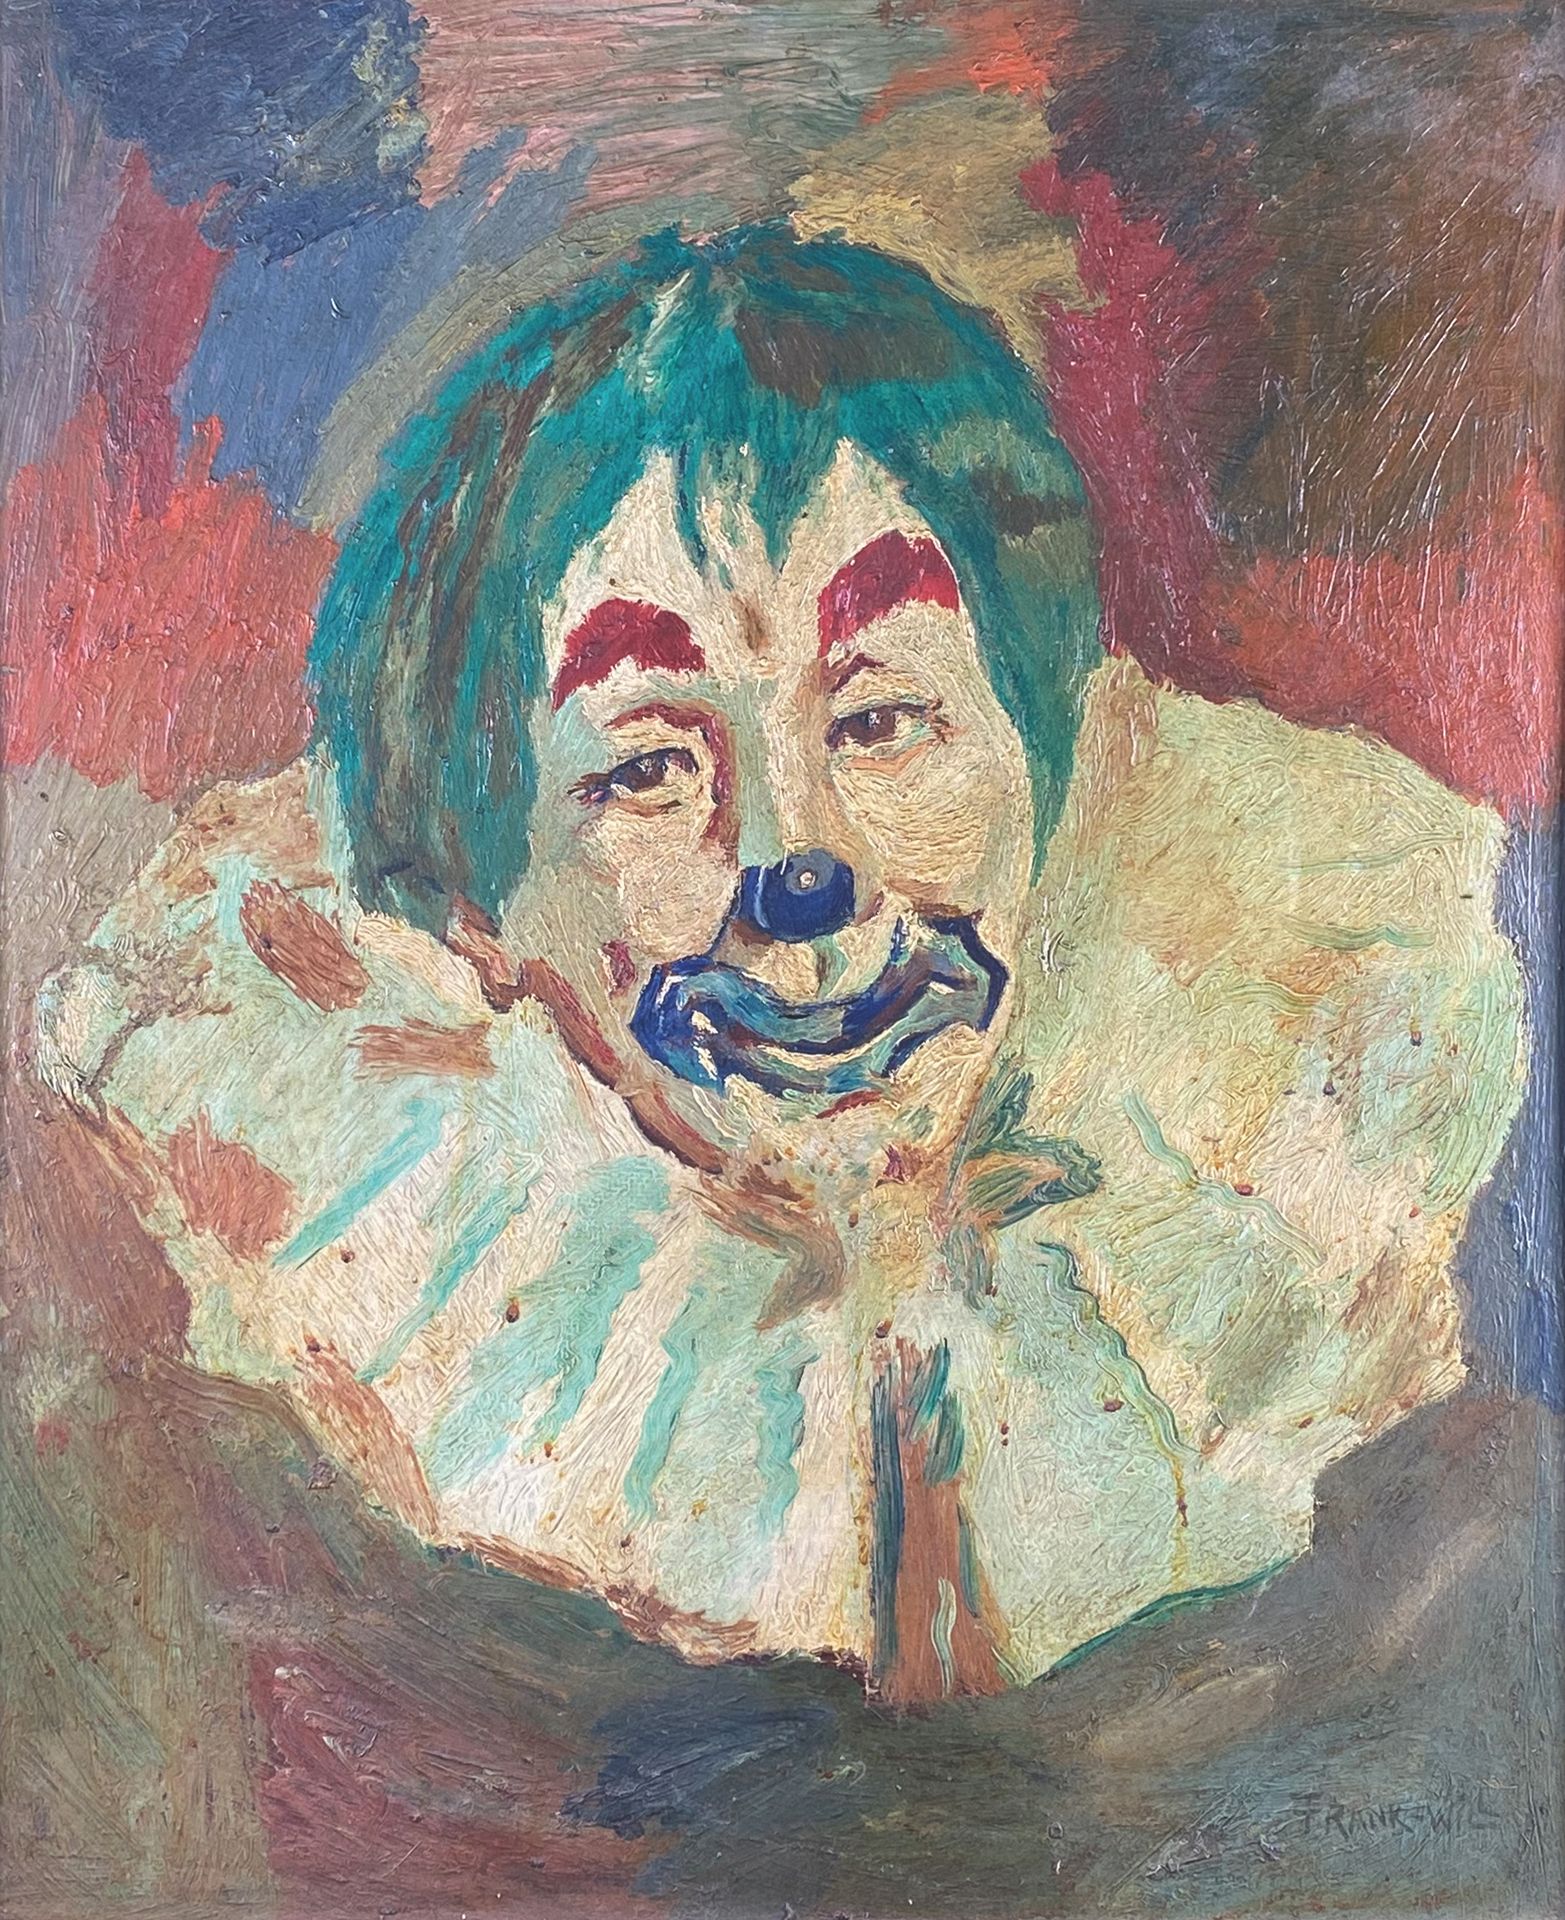 Null FRANK-WILL (1900-1951)

The clown.

Oil on isorel signed lower right.

60,5&hellip;